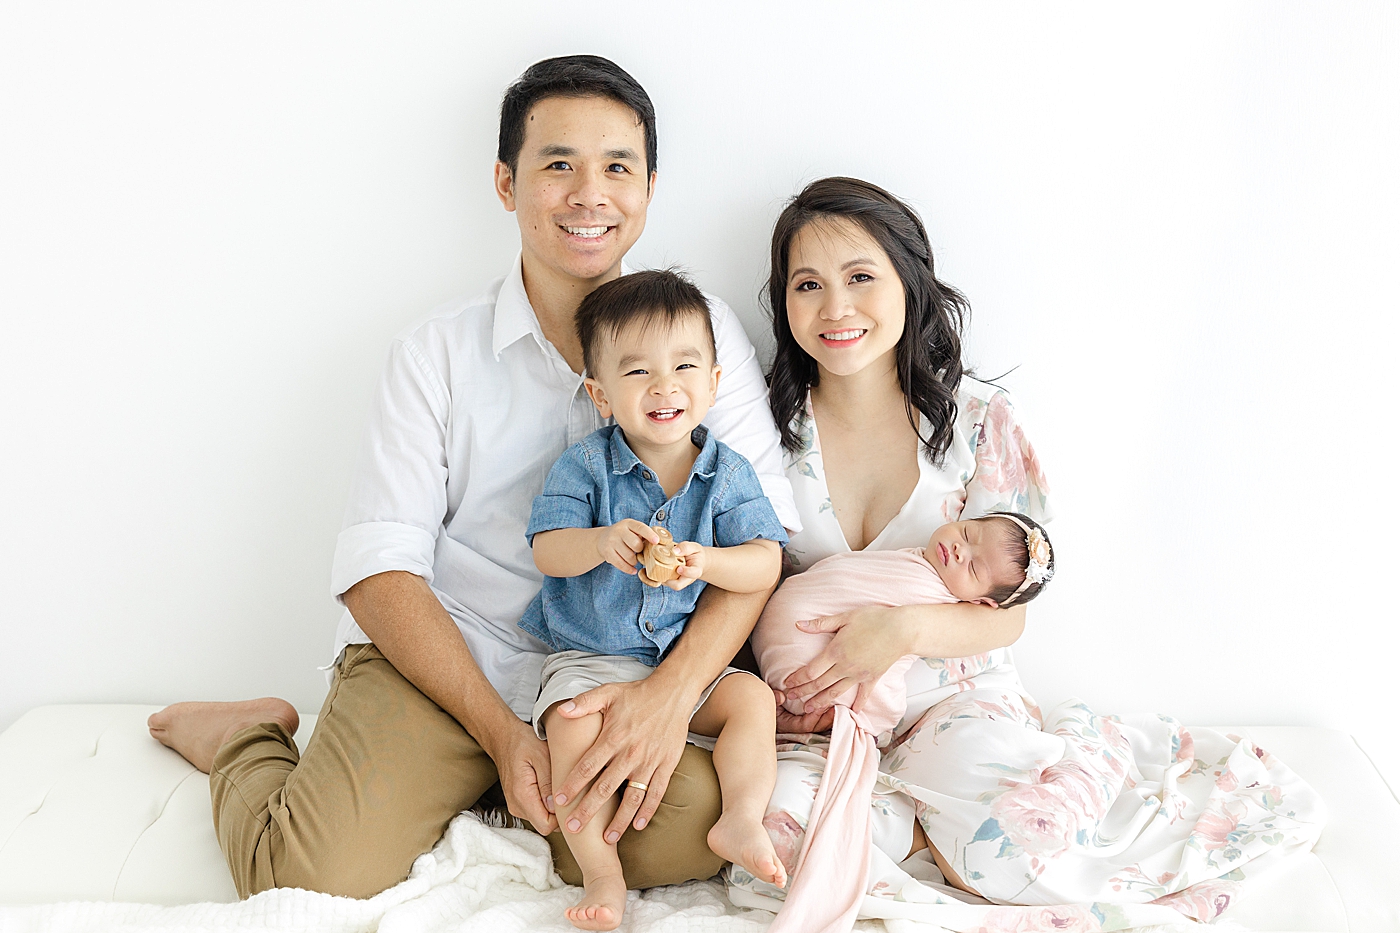 Family of four with their newborn during her Newborn sessions with siblings | Image by Sana Ahmed